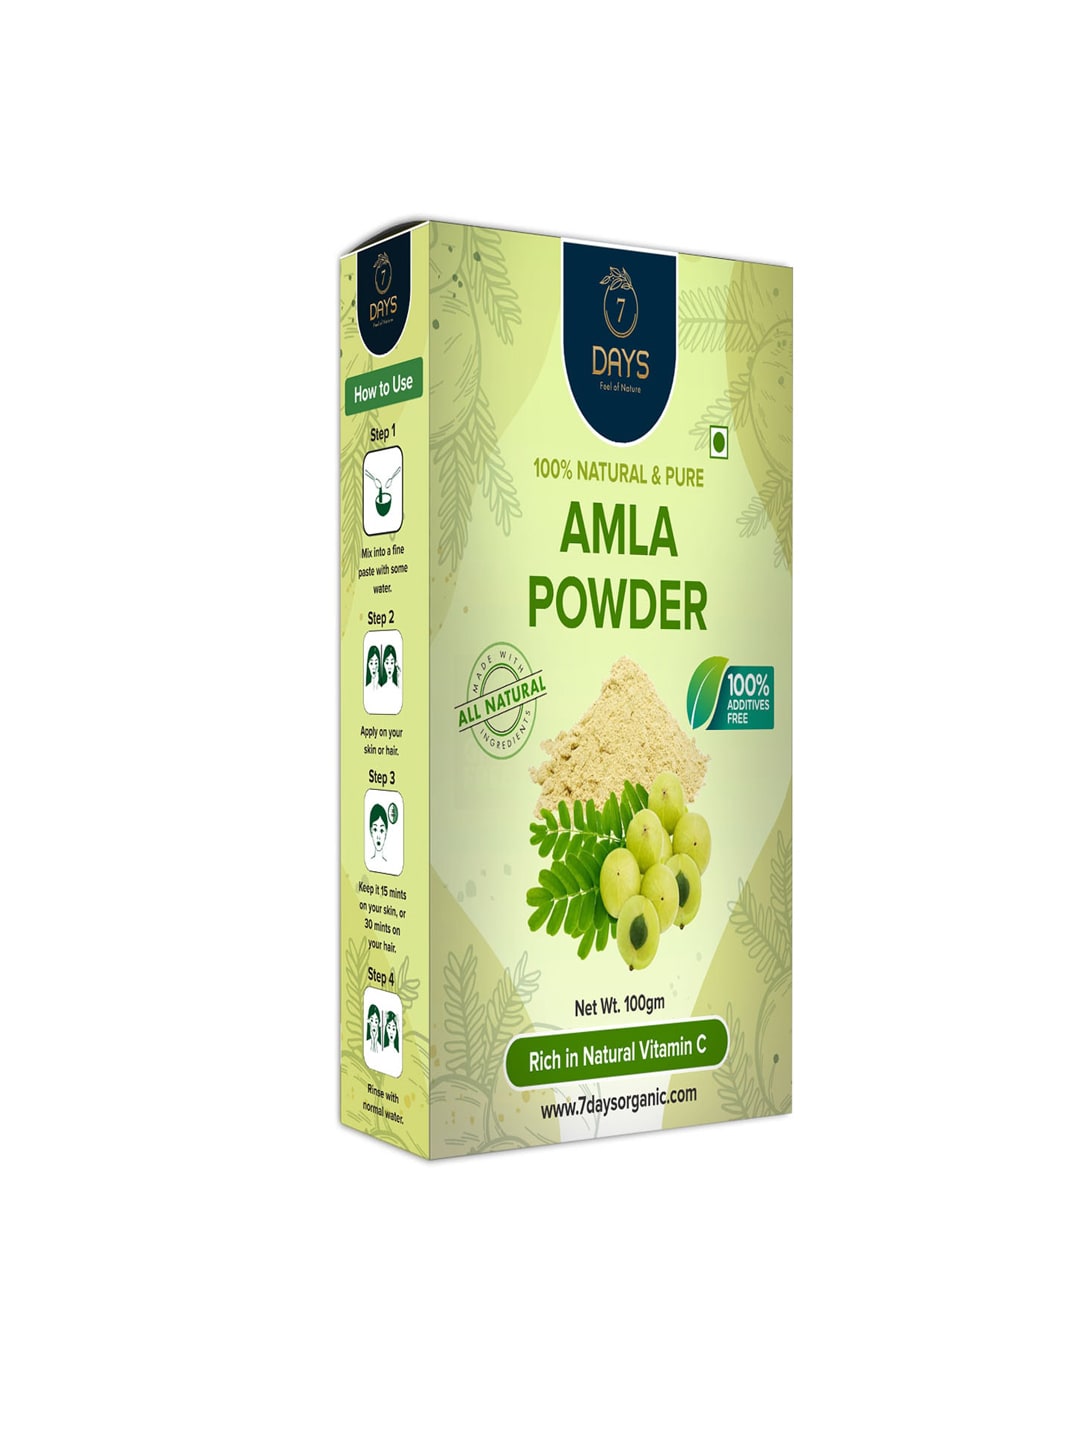 7 DAYS 100% Natural & Pure Amla Powder for Hair & Skin - 100 g Price in India